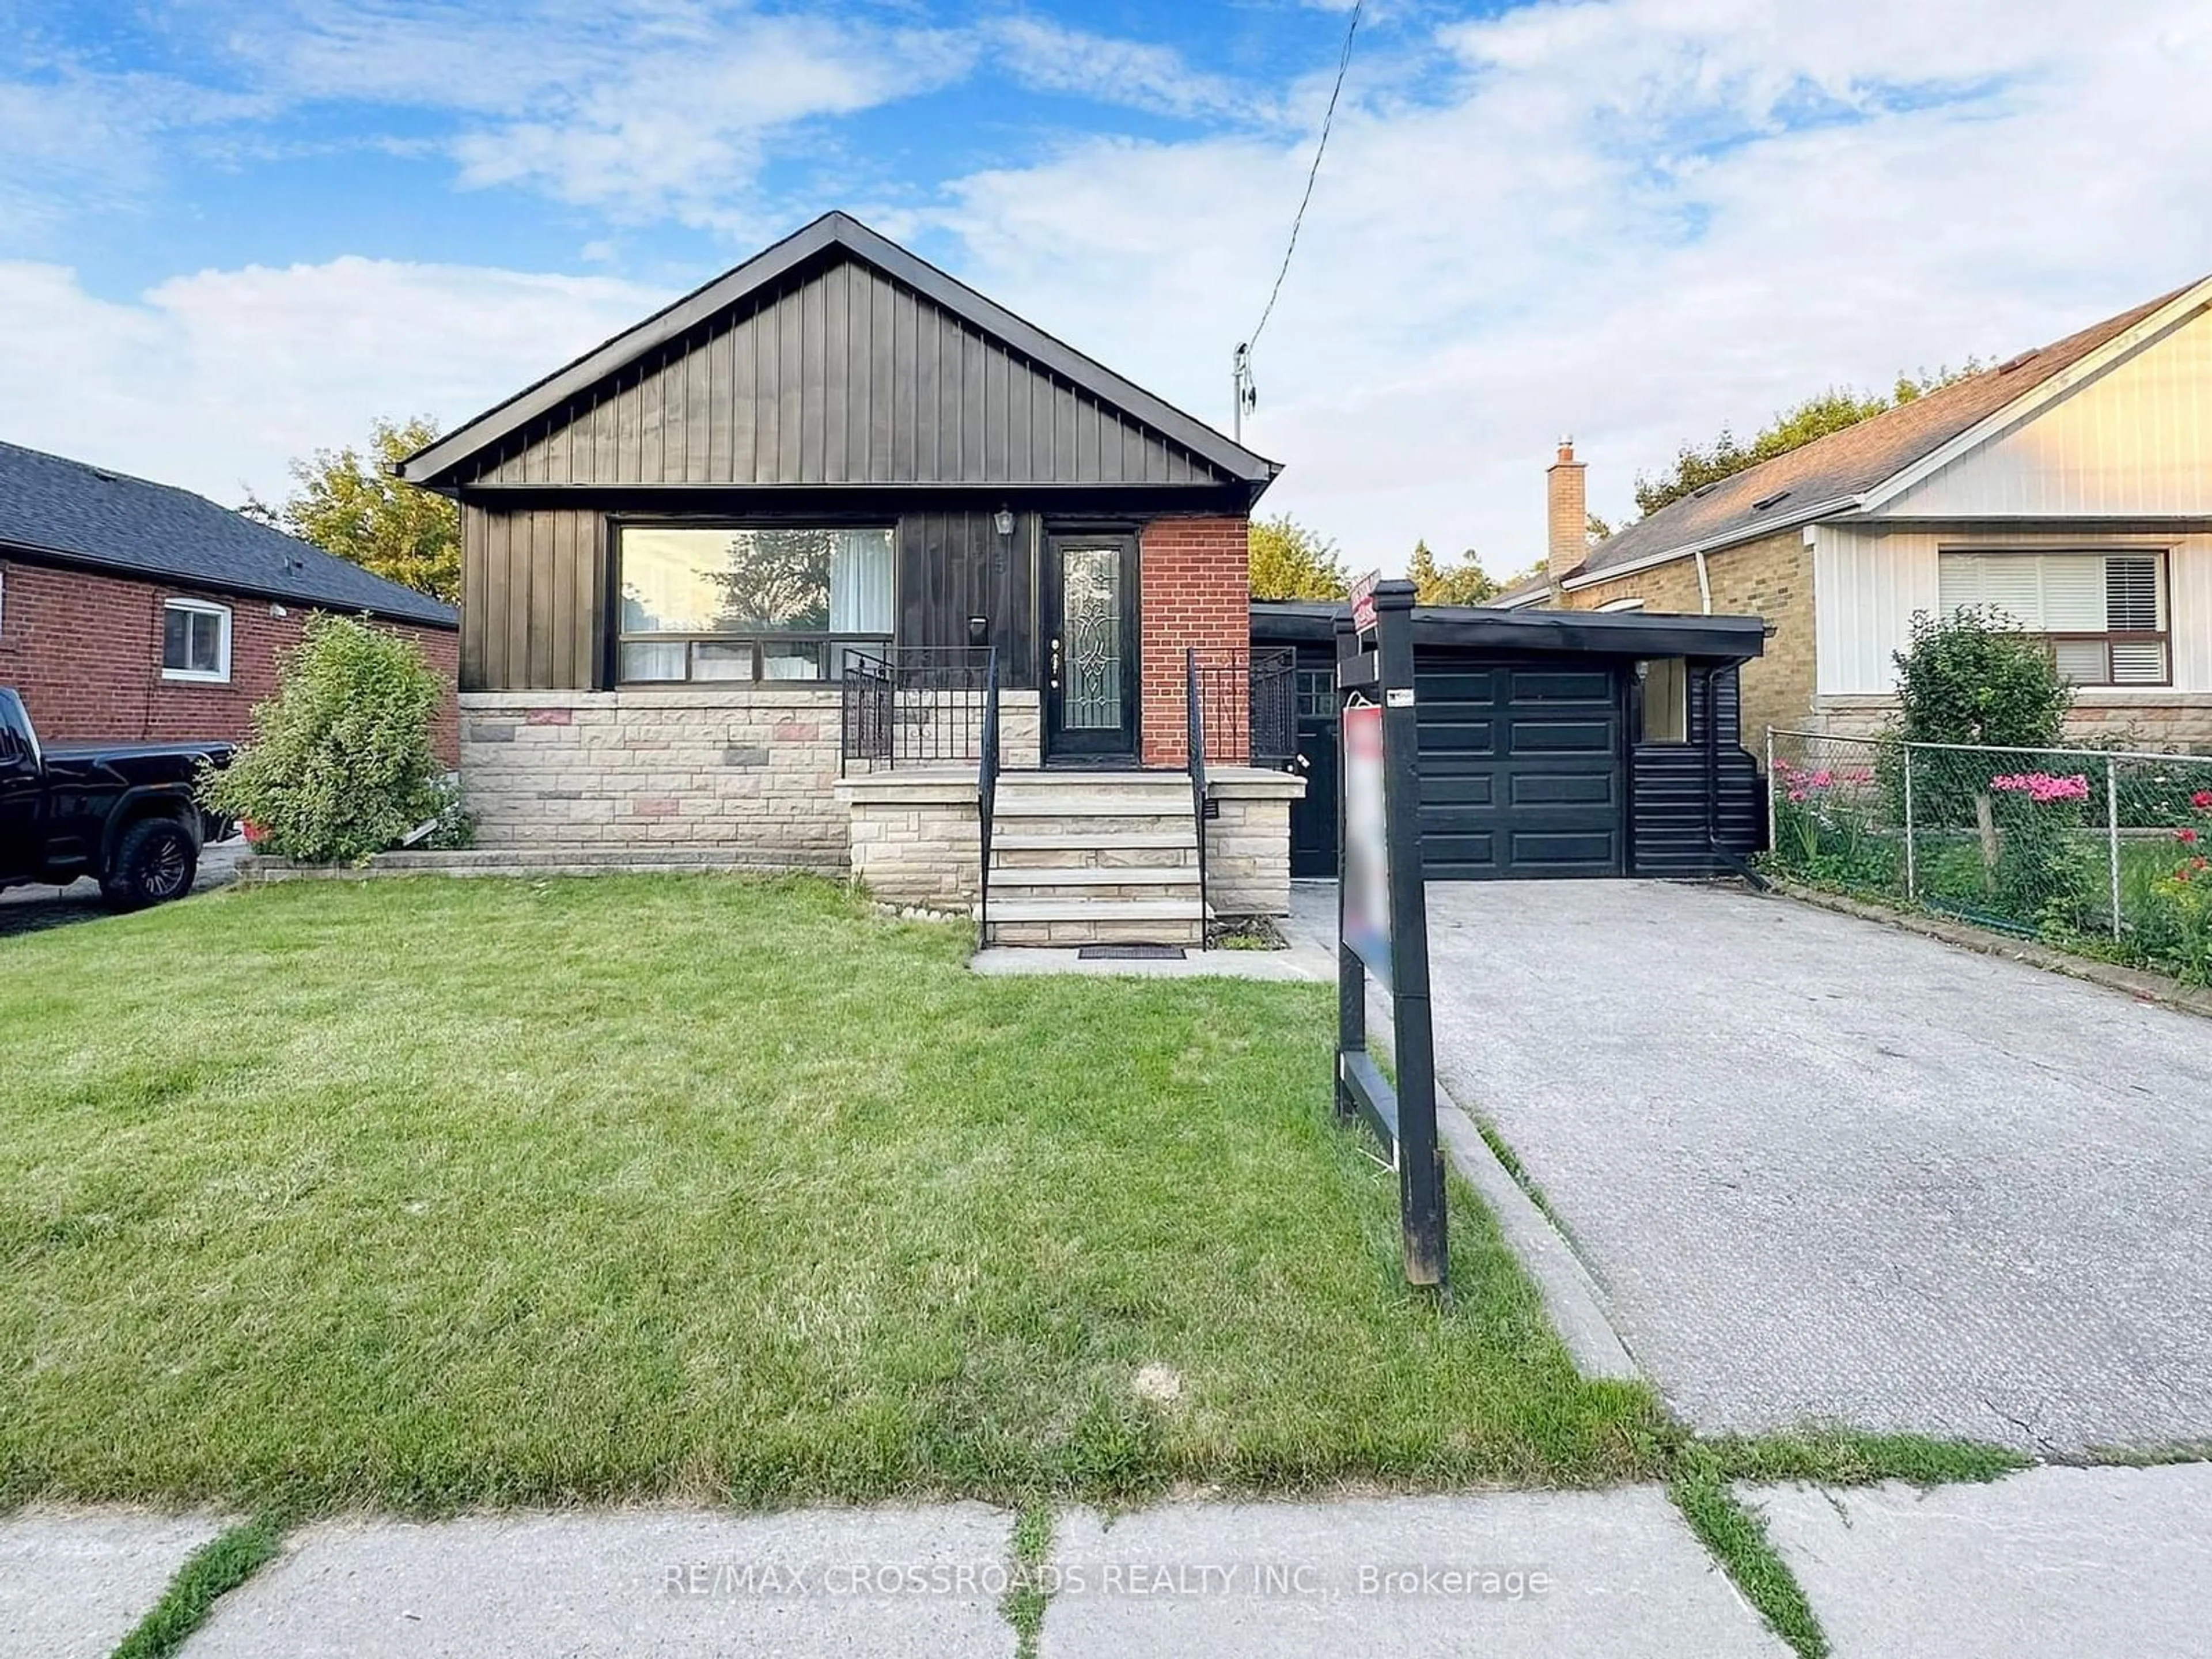 Frontside or backside of a home for 45 Blaisdale Rd, Toronto Ontario M1P 1V9